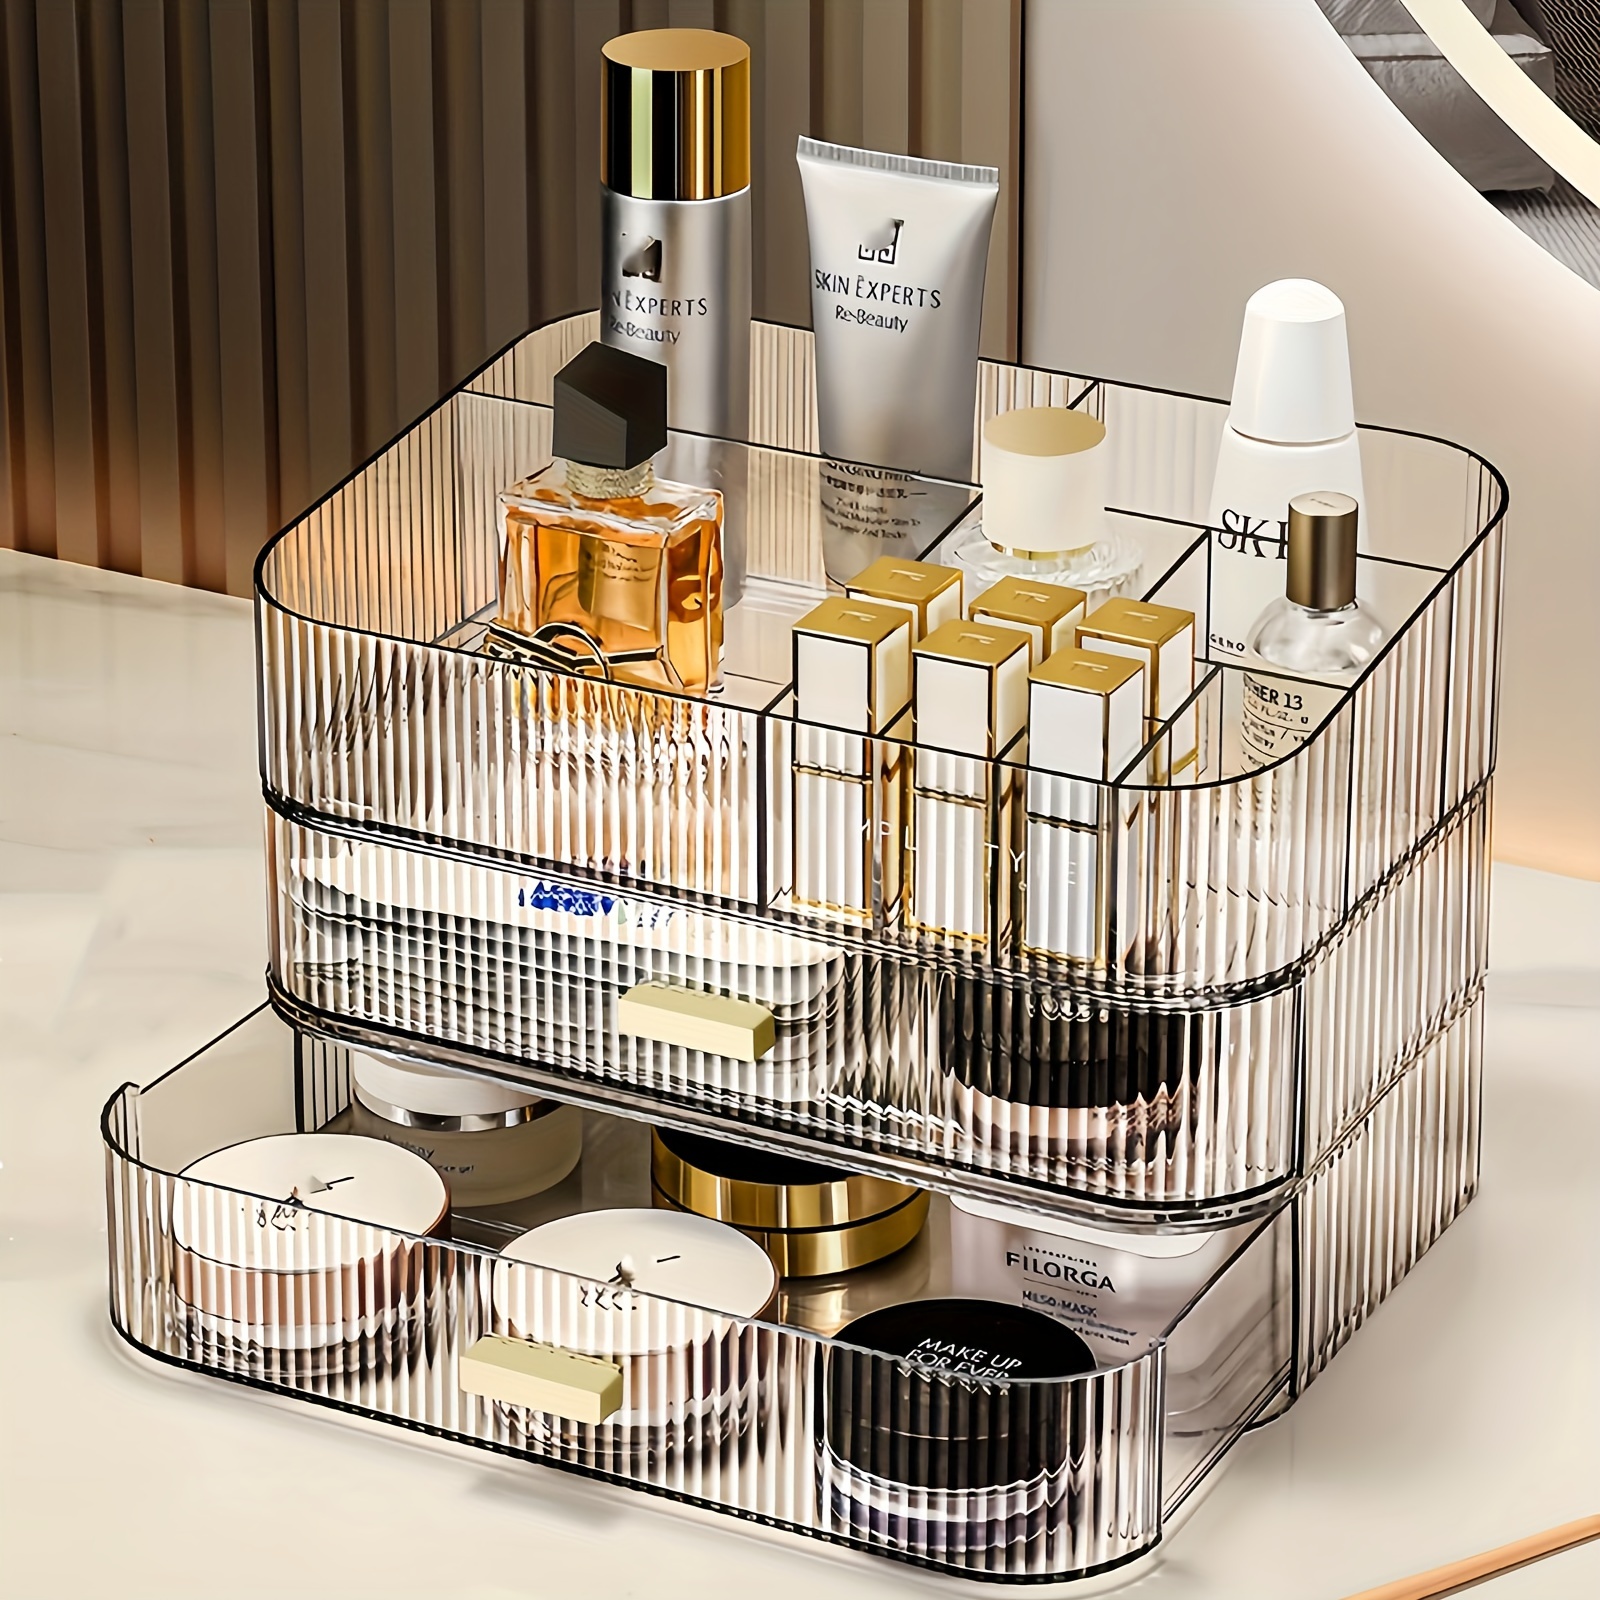 

Clear Stackable Makeup Organizer With Drawers, Bathroom Vanity Organizer And Storage, Ideal For Desk And Dresser Countertops, Spacious Design For Cosmetics, Makeup Palettes, Skincare, Lipsticks